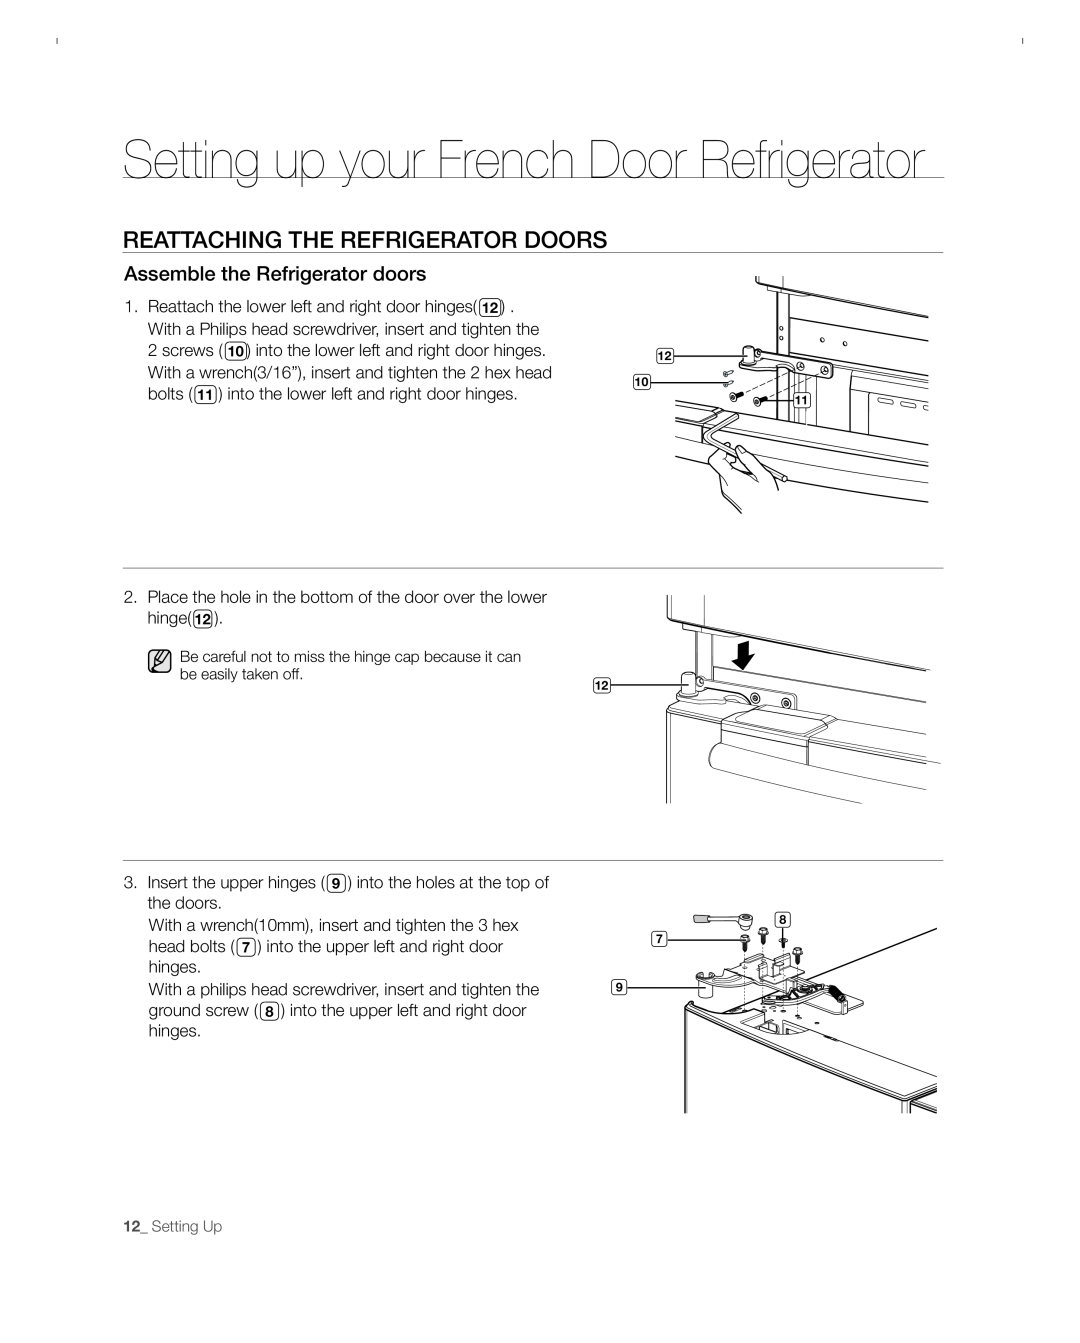 Samsung RFG297ACBP user manual REAttACHinG tHE REFRiGERAtoR DooRs, Setting up your French Door Refrigerator 